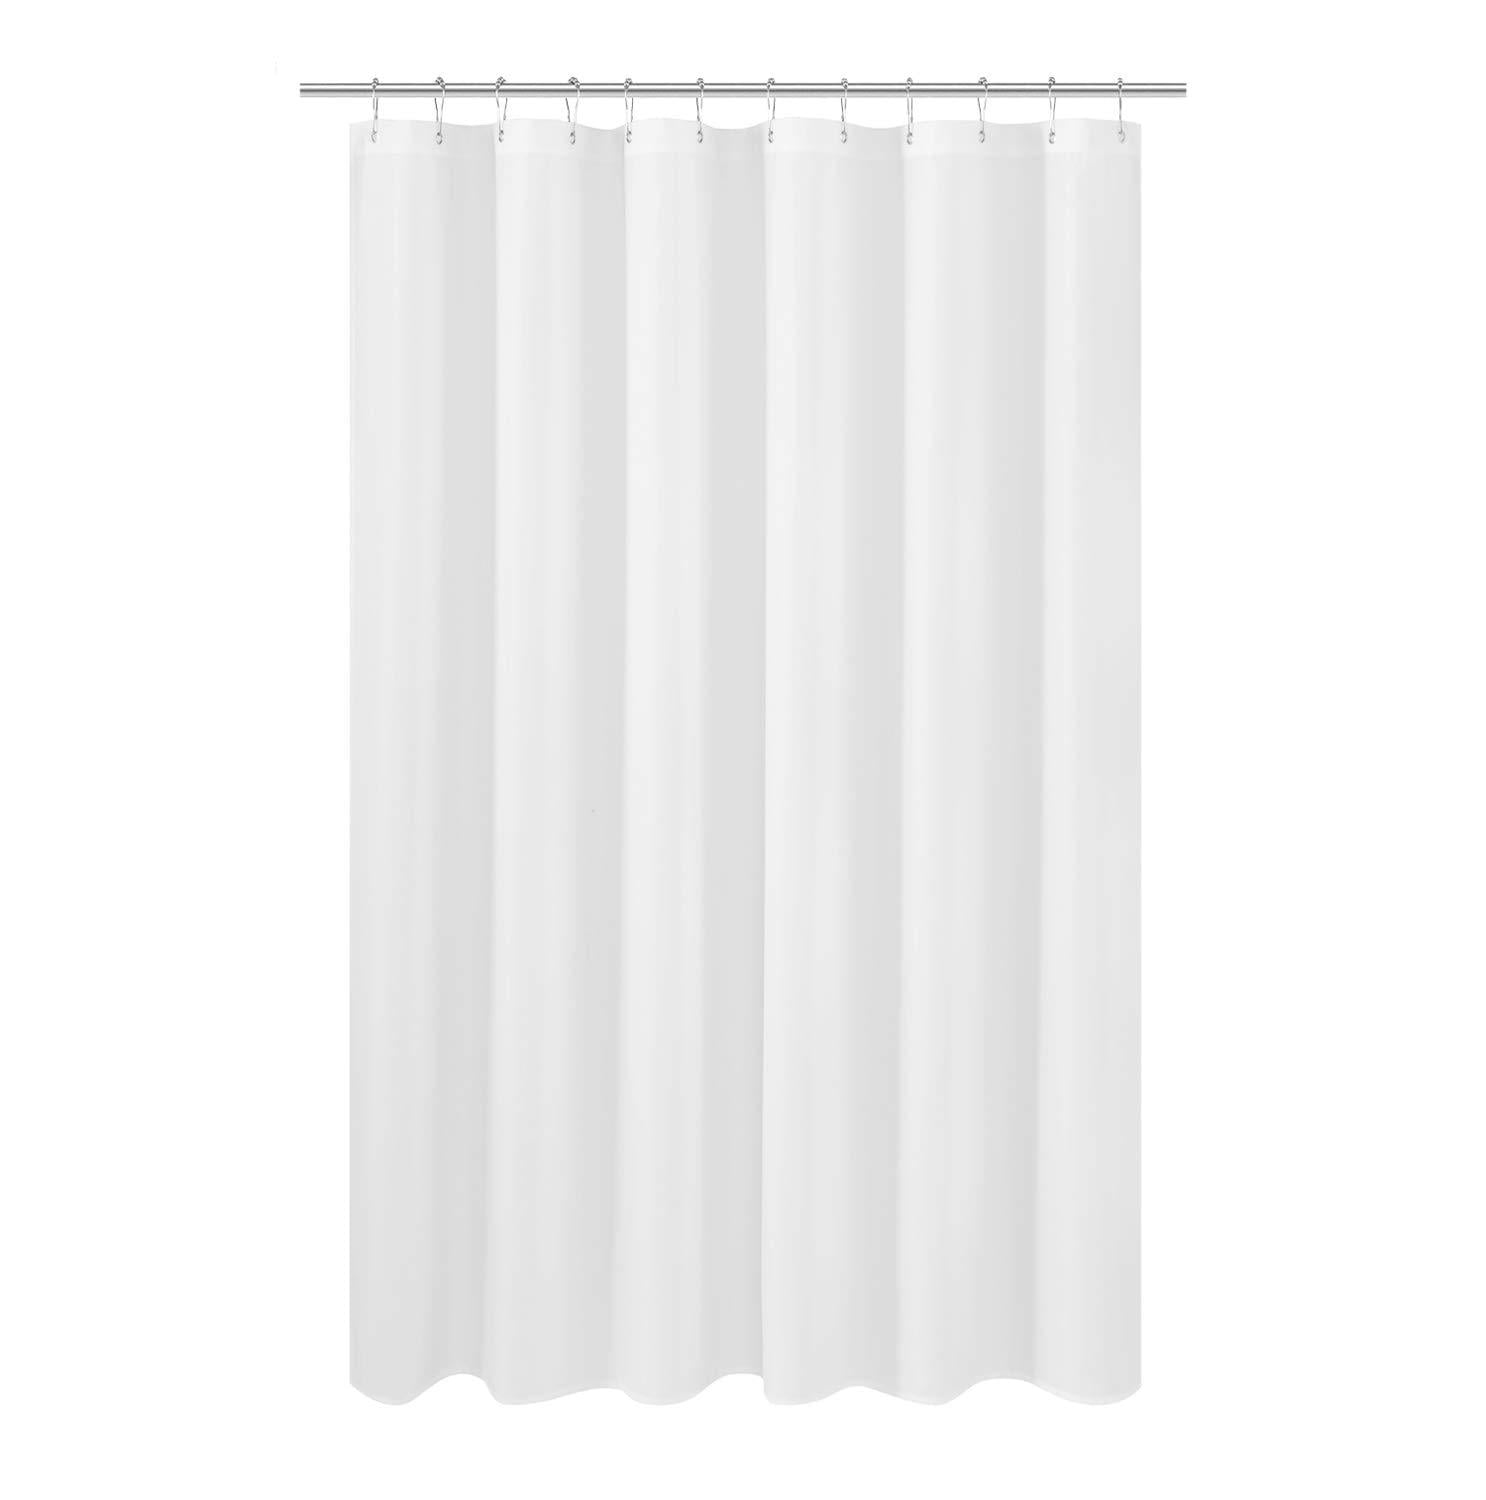 Barossa Design Waterproof Fabric Shower, Does Cotton Shower Curtains Need Liner